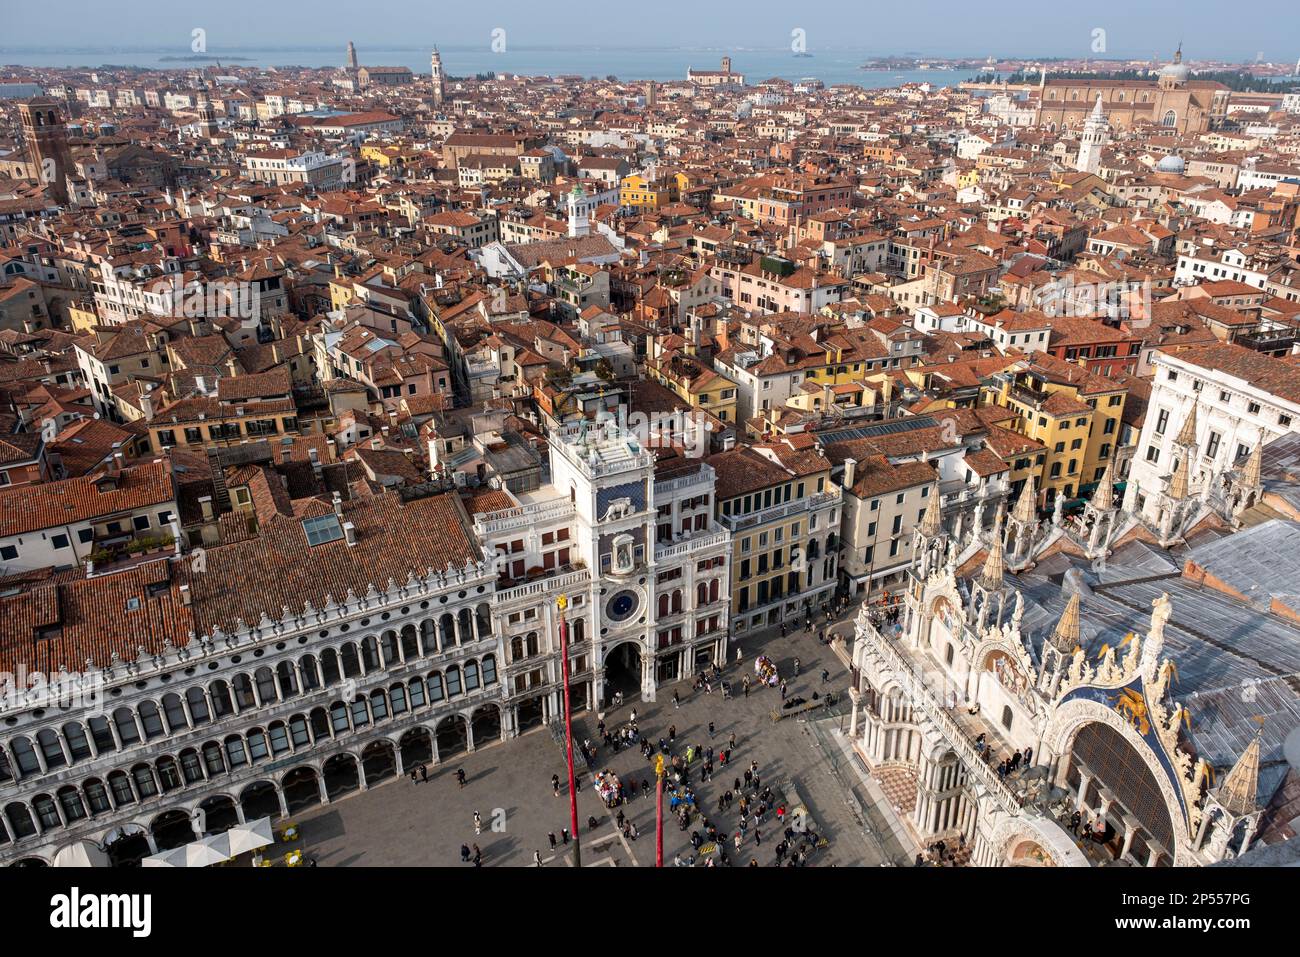 View over the rooftops of Venice from the San Marco Campanile, Venice, Italy Stock Photo